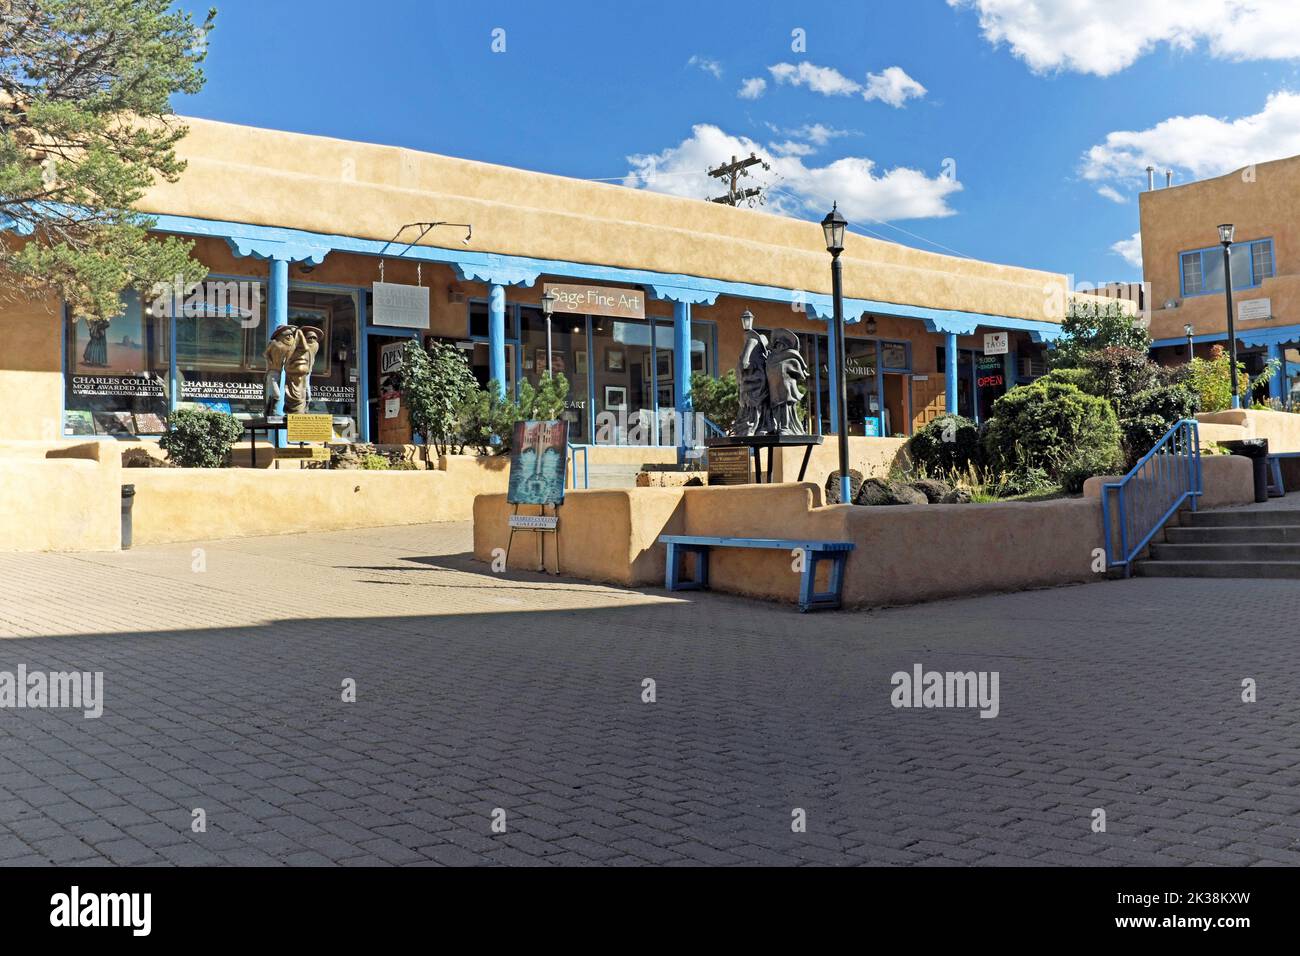 A section of the outdoor historic Taos Plaza in Taos, New Mexico, includes public art attesting to the artistic vibe of the area. Stock Photo